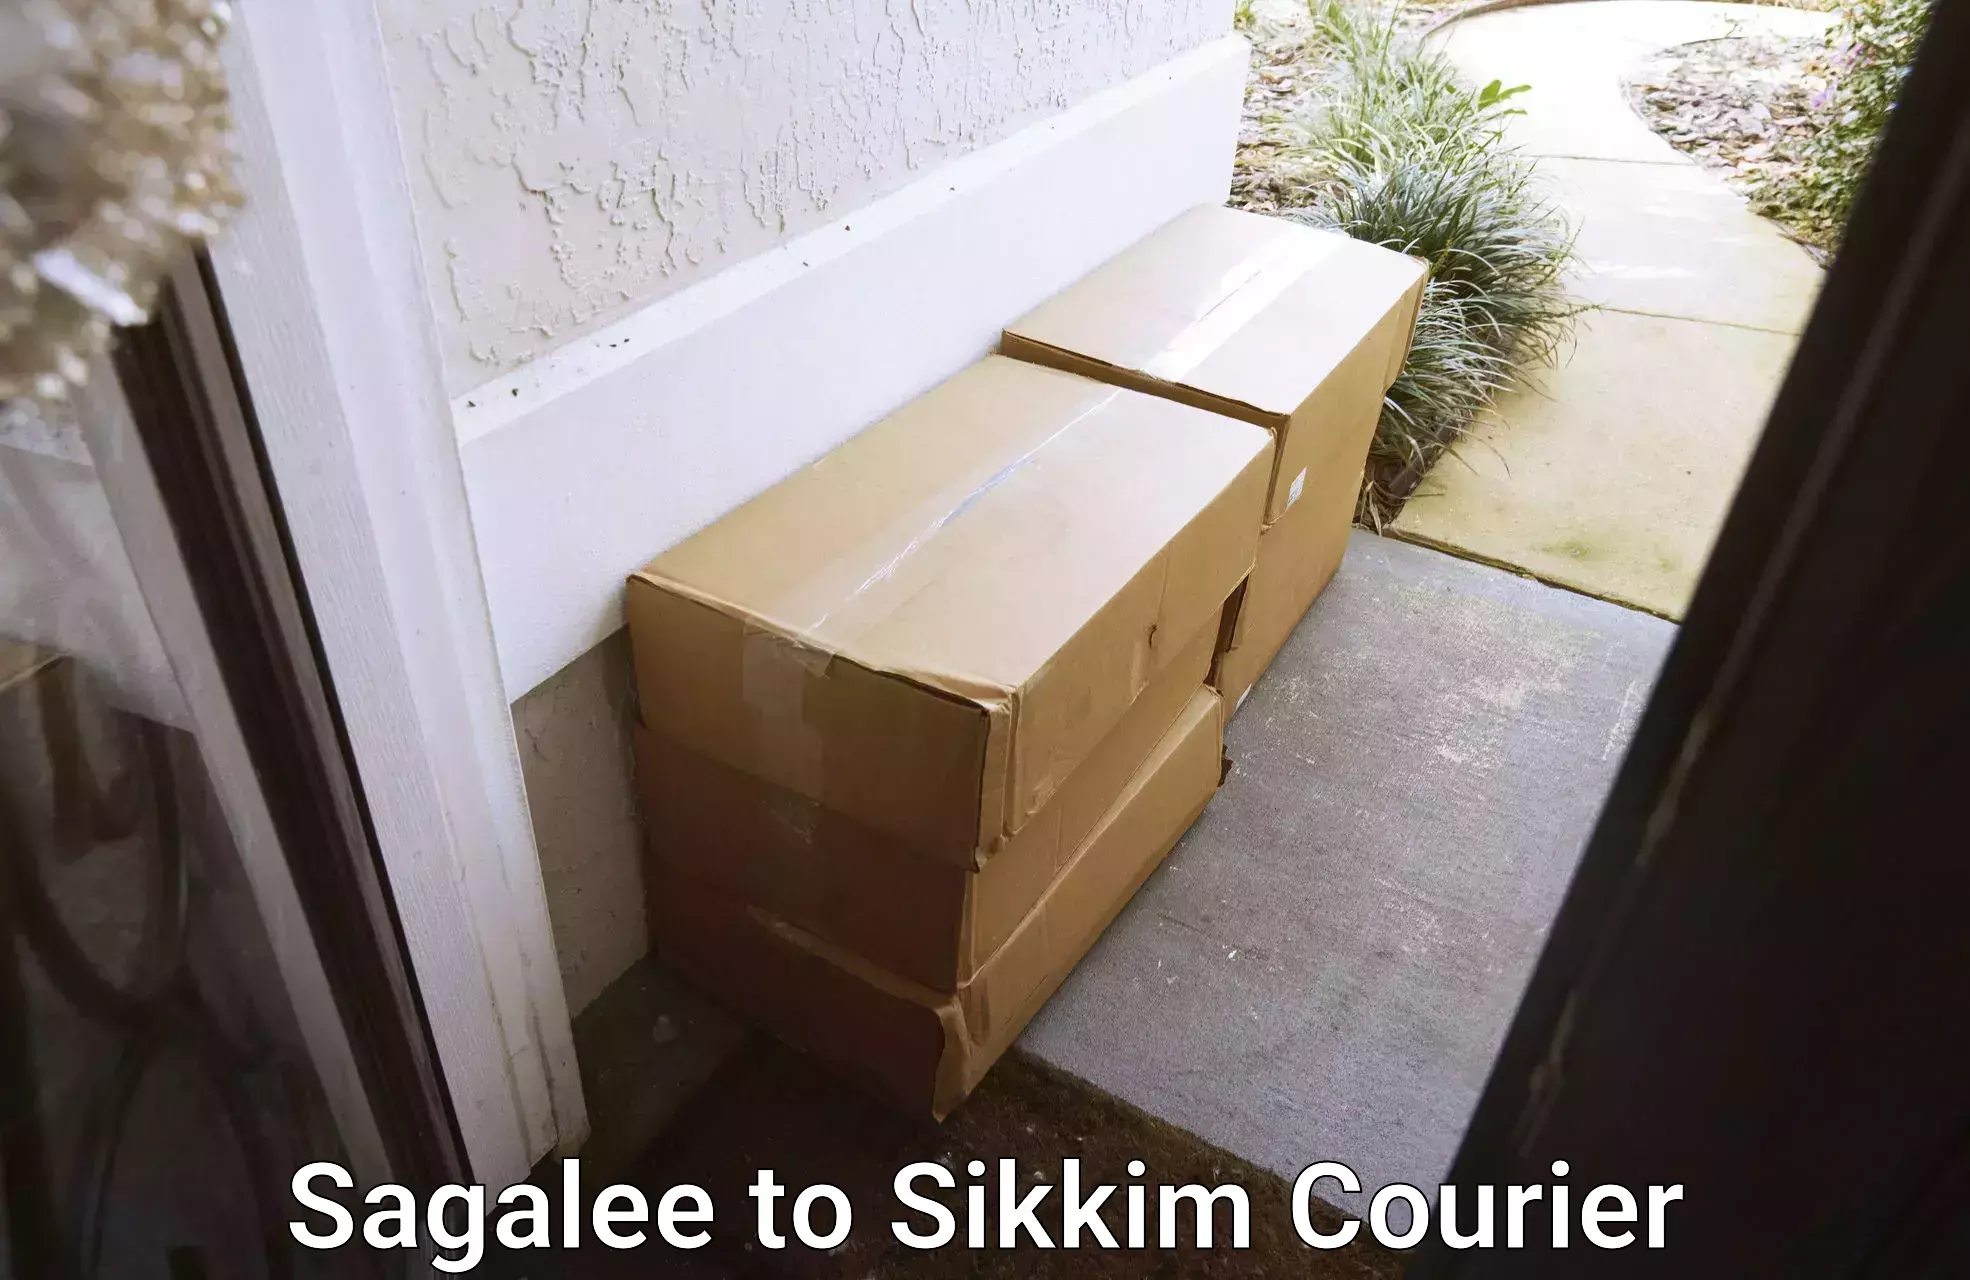 Efficient order fulfillment Sagalee to Sikkim